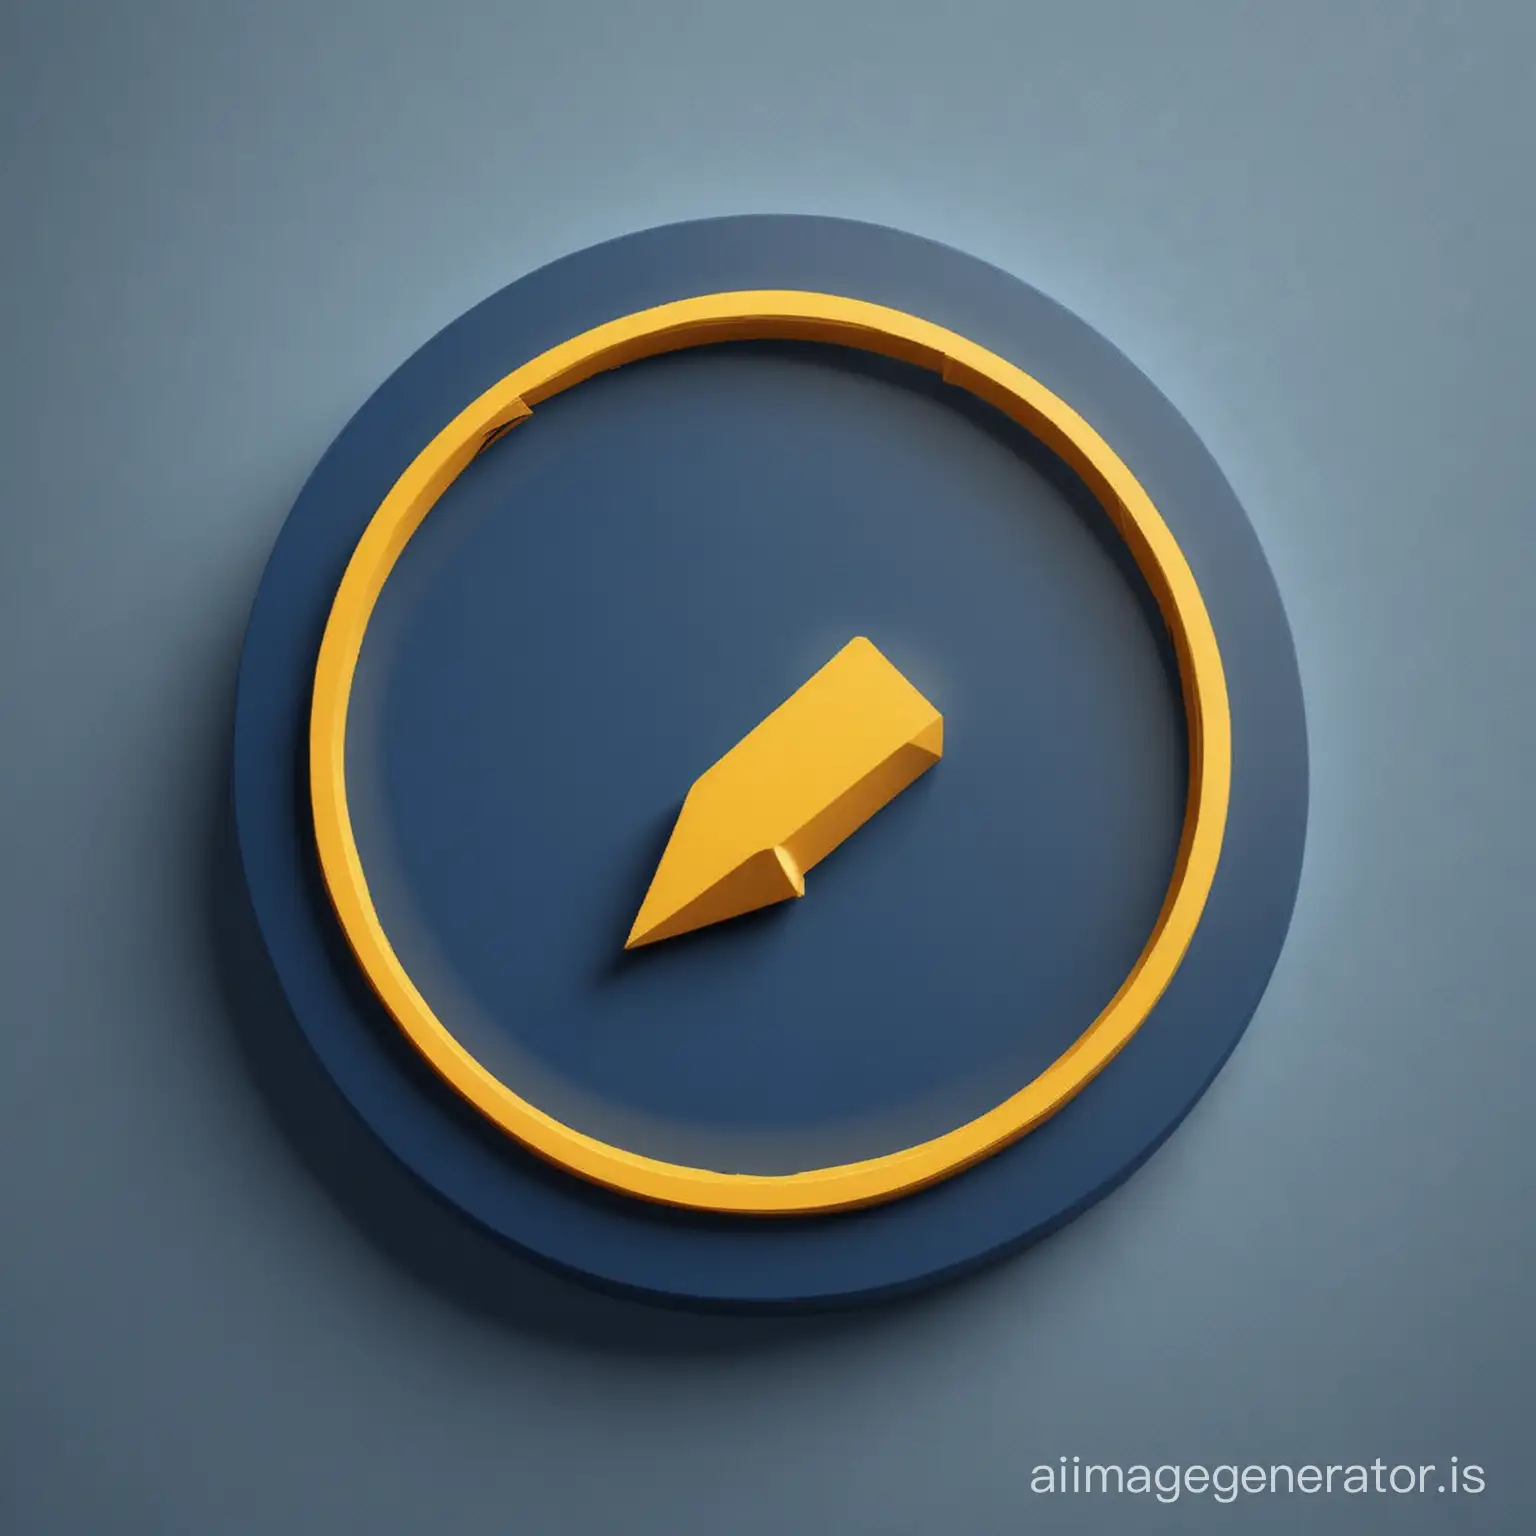 3D-Dark-Blue-Icon-with-Yellow-Exclamation-Point-on-Centered-Blue-Circle-on-Blanco-Background